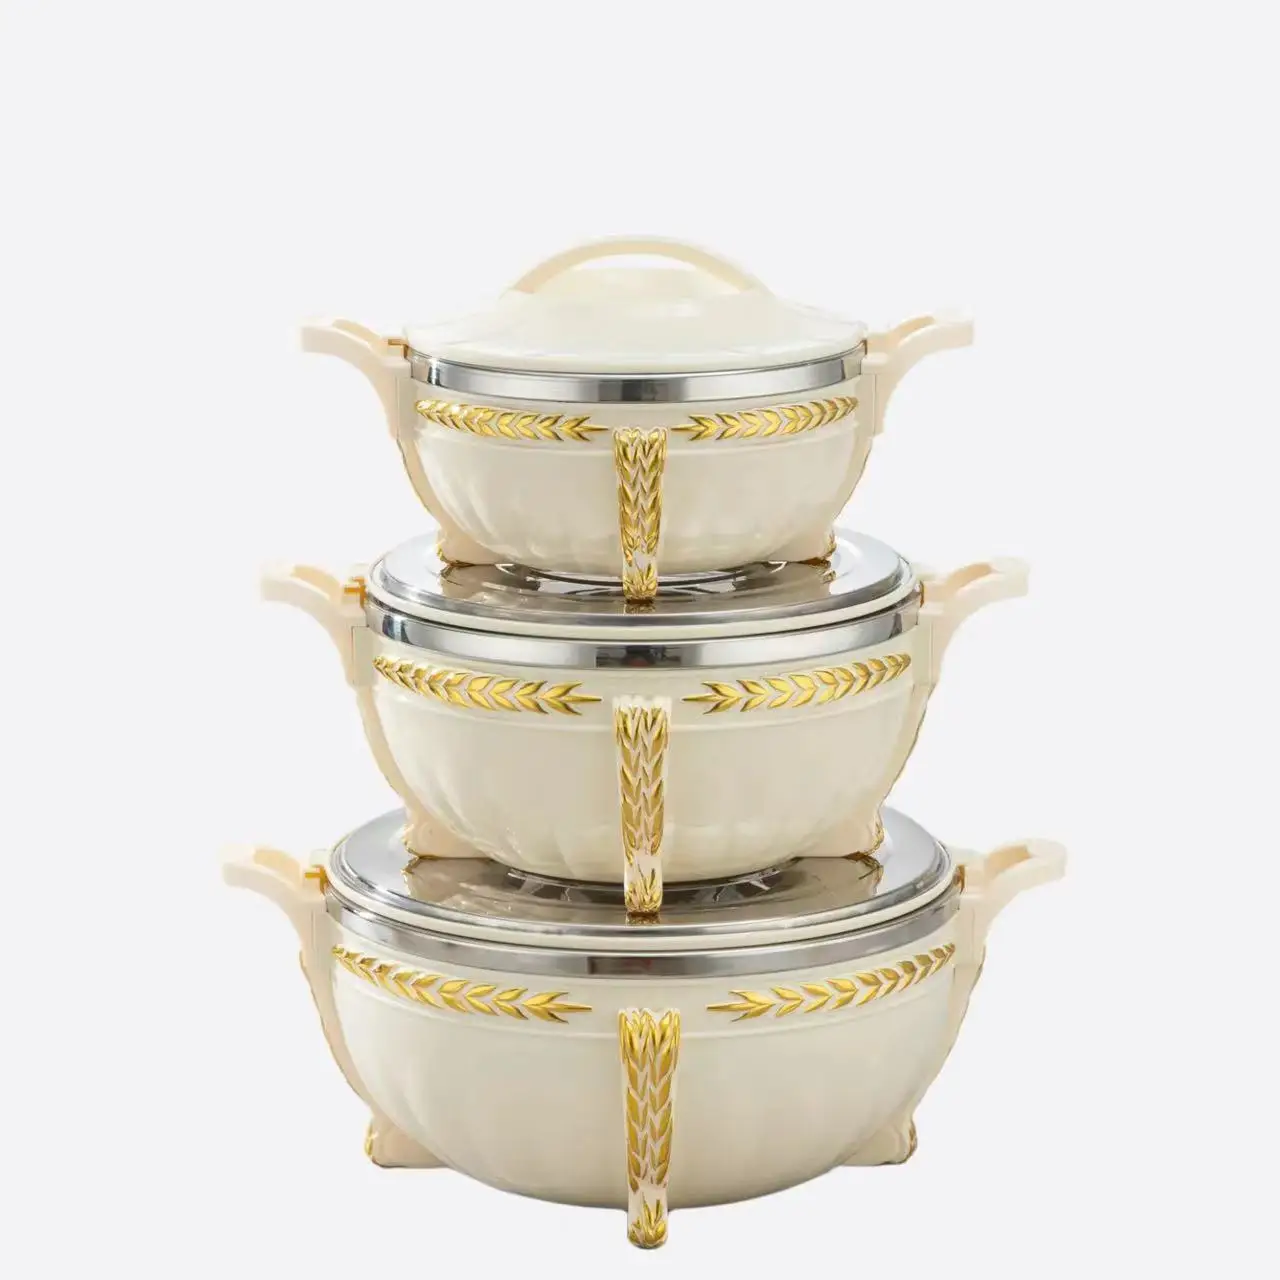 Hot Selling Luxury  USA European Muslin Food Storage & Container 3L+7L+10L 3pcs Set Cooking Pot Set for Ramadan